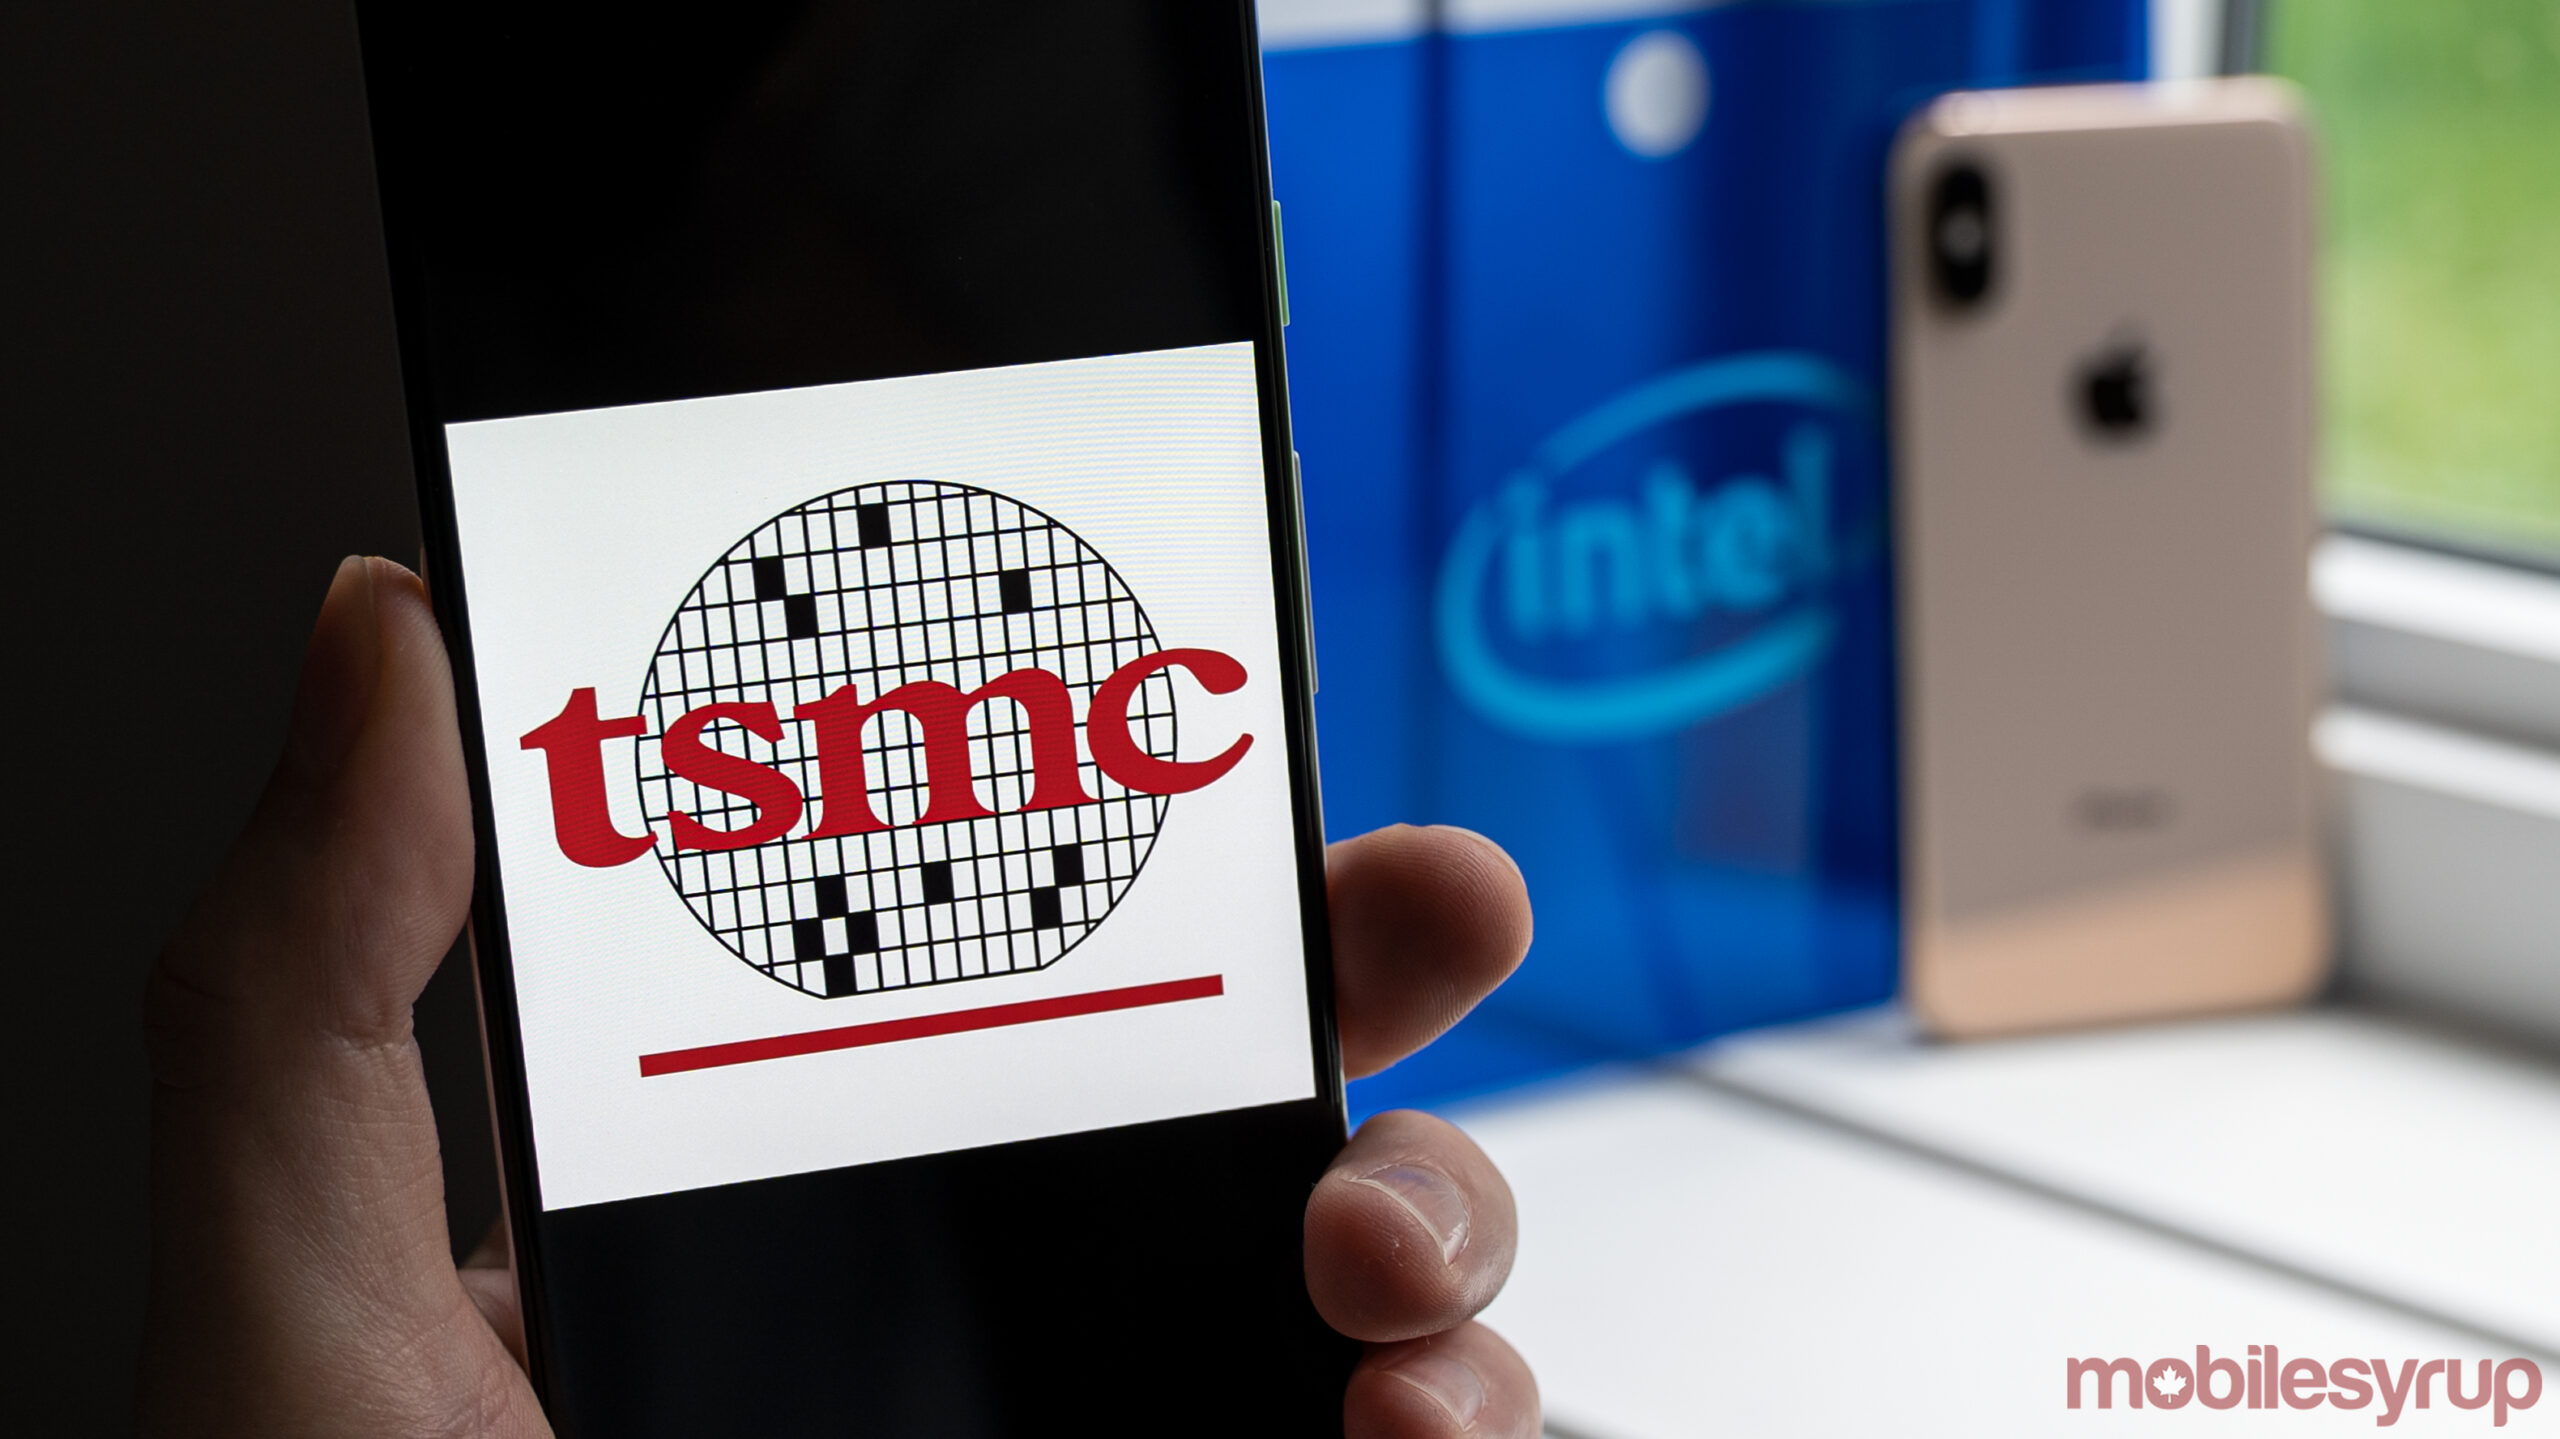 TSMC logo with Intel, Apple in the background